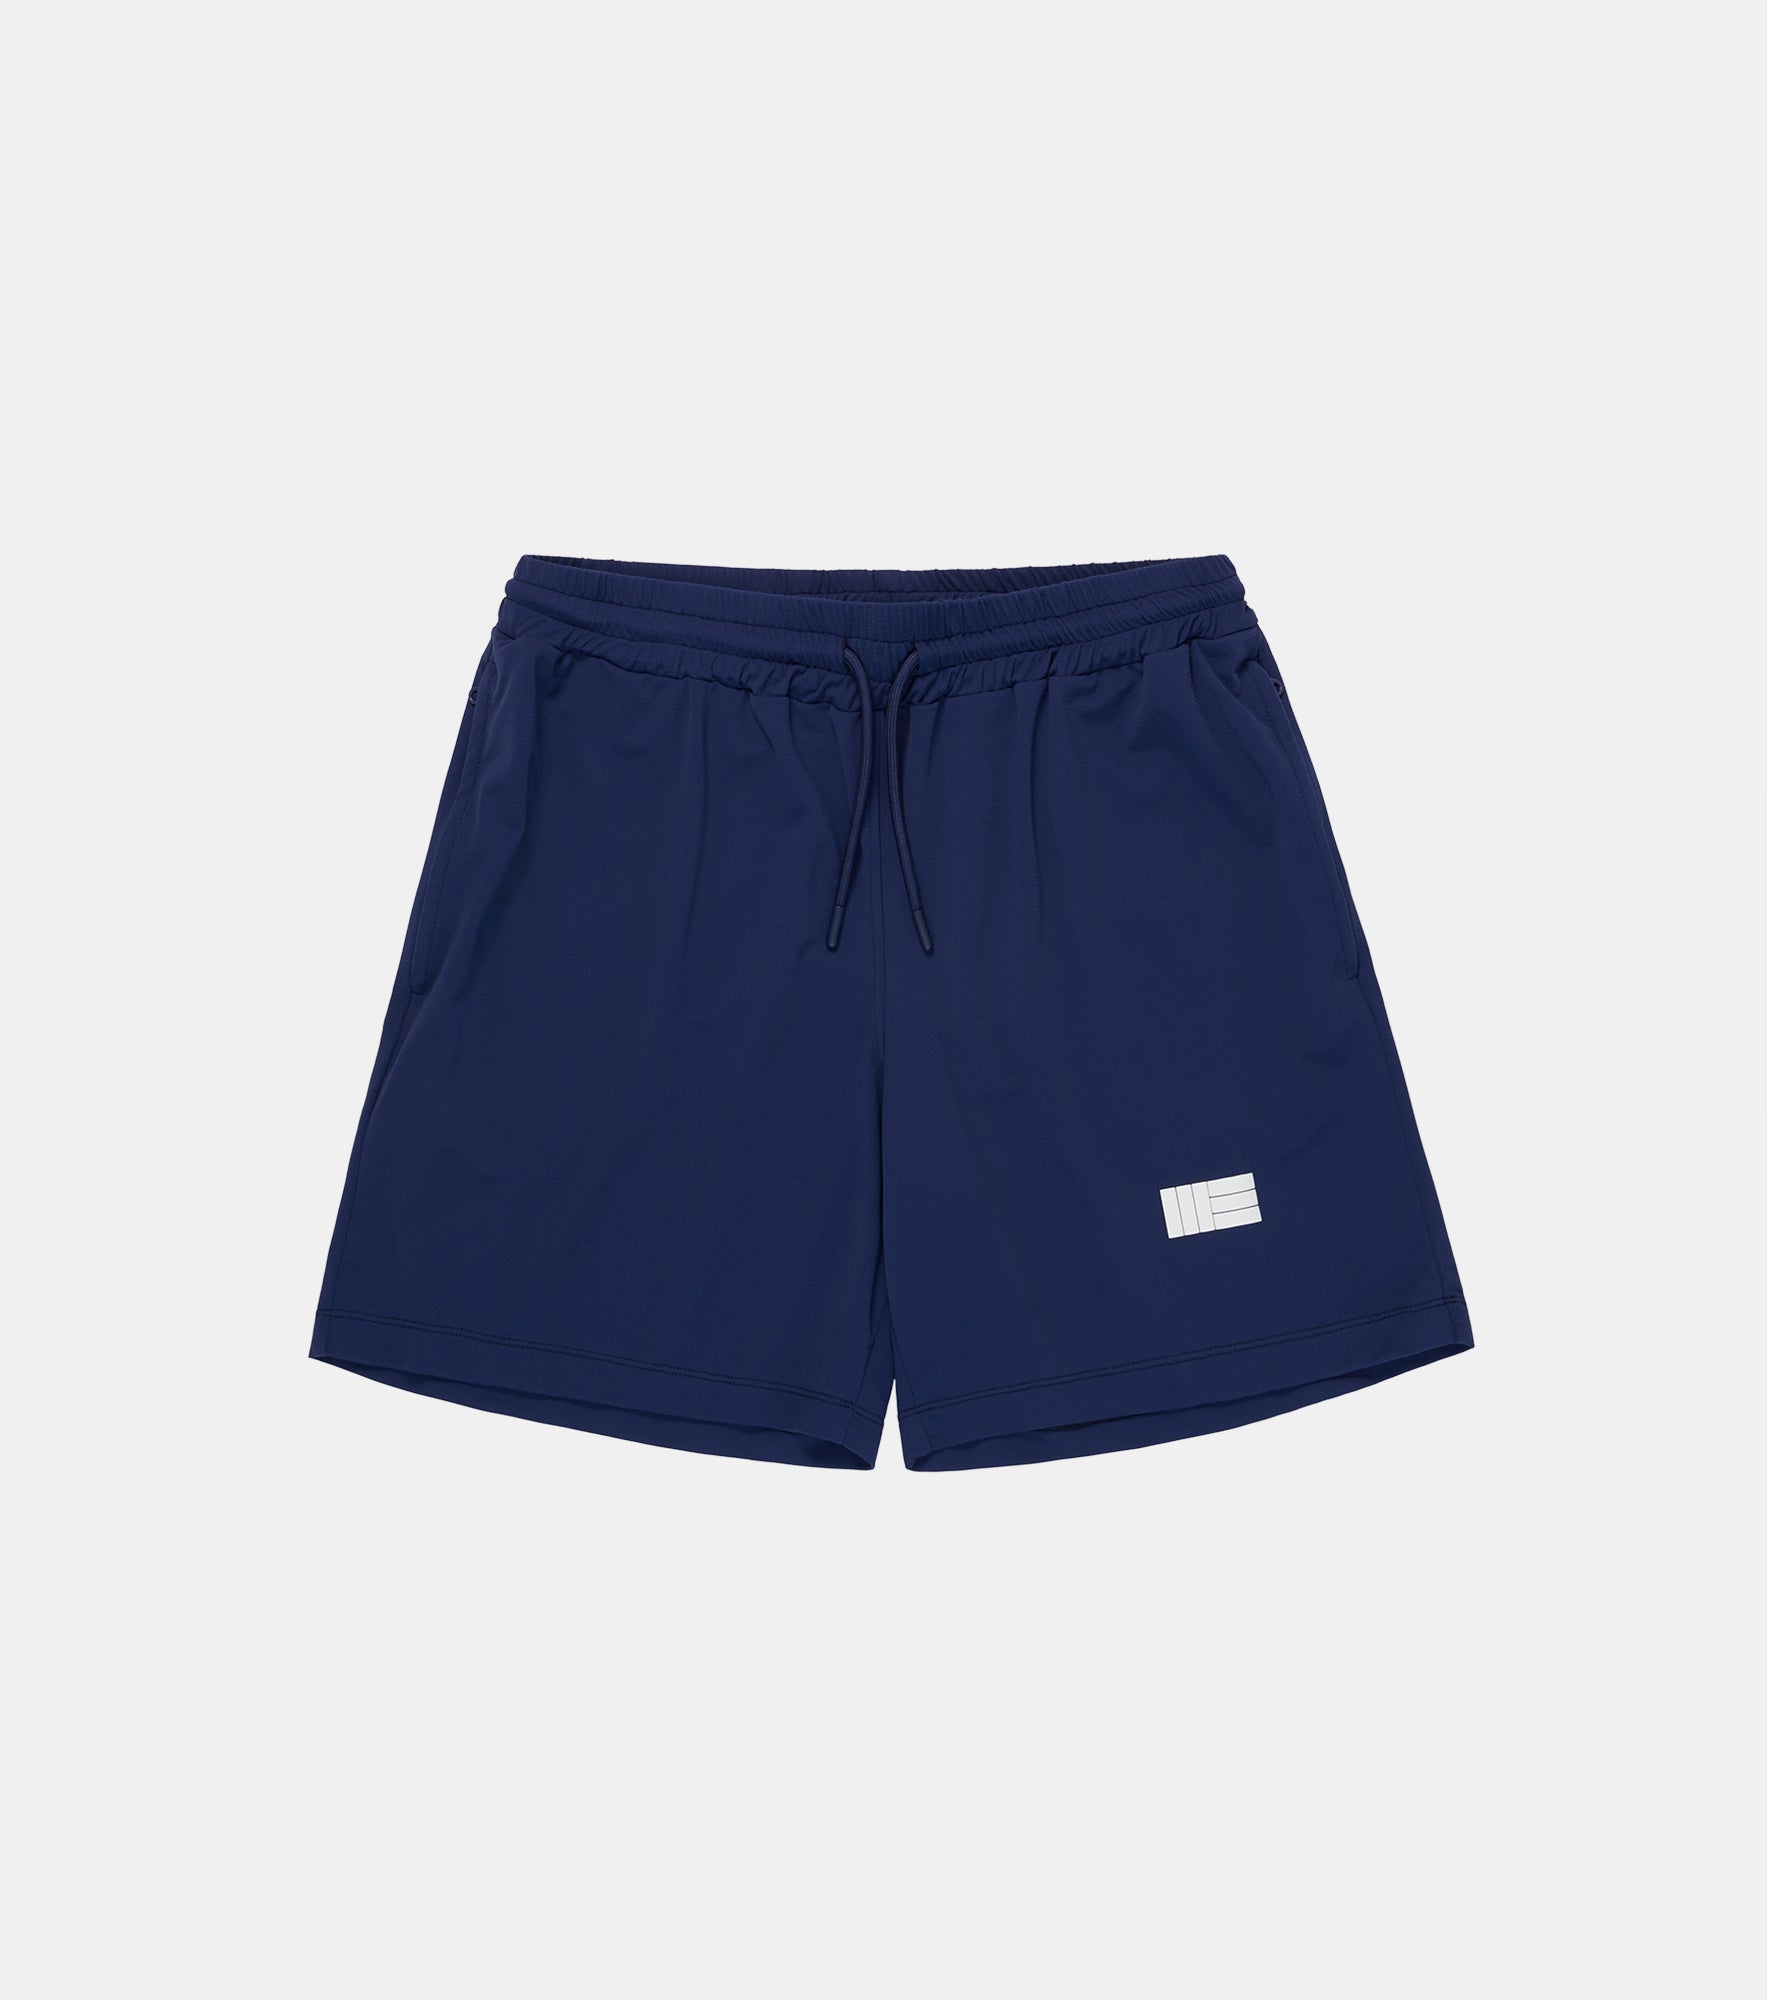 Mens Premium Athletic Sport Shorts Made in NYC - Navy